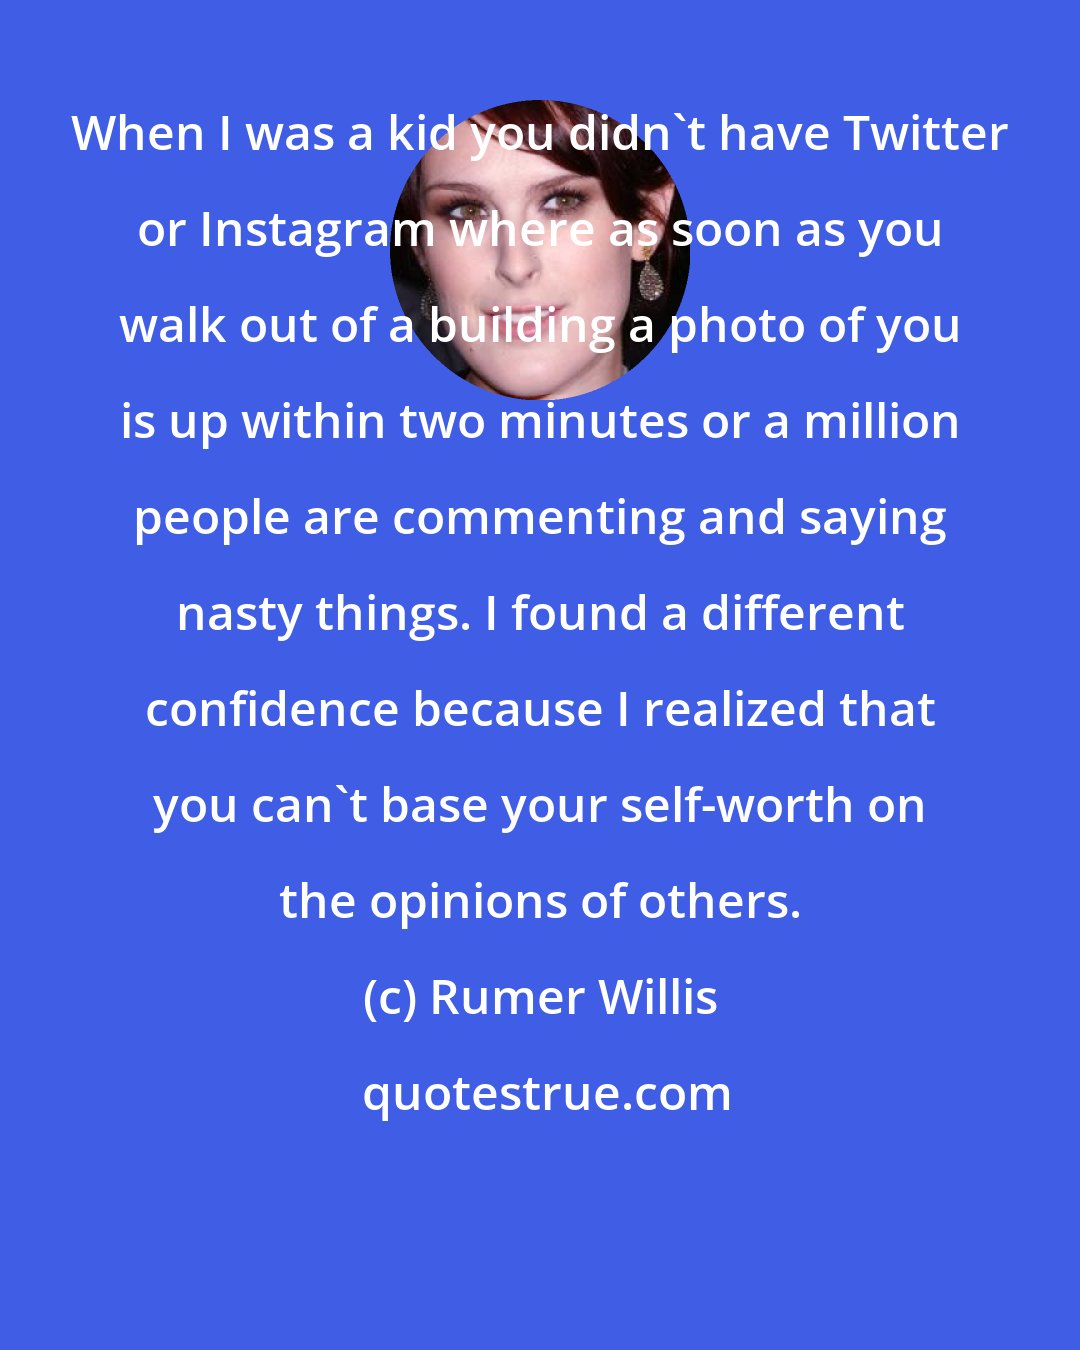 Rumer Willis: When I was a kid you didn't have Twitter or Instagram where as soon as you walk out of a building a photo of you is up within two minutes or a million people are commenting and saying nasty things. I found a different confidence because I realized that you can't base your self-worth on the opinions of others.